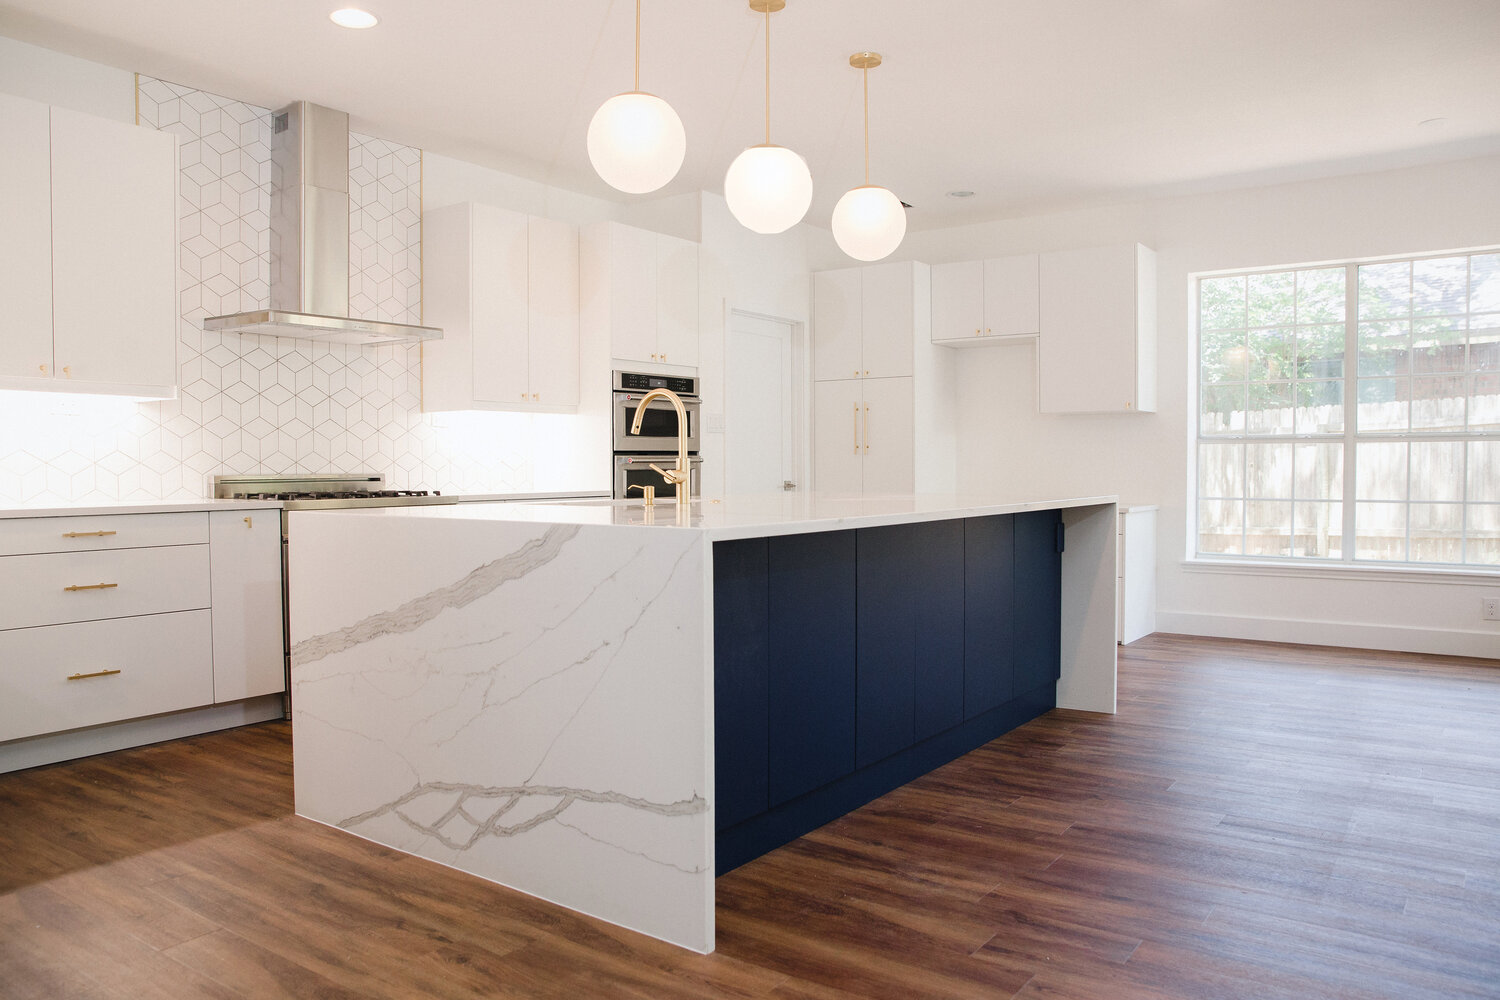 Our Favorite Countertop Options (for any budget!)